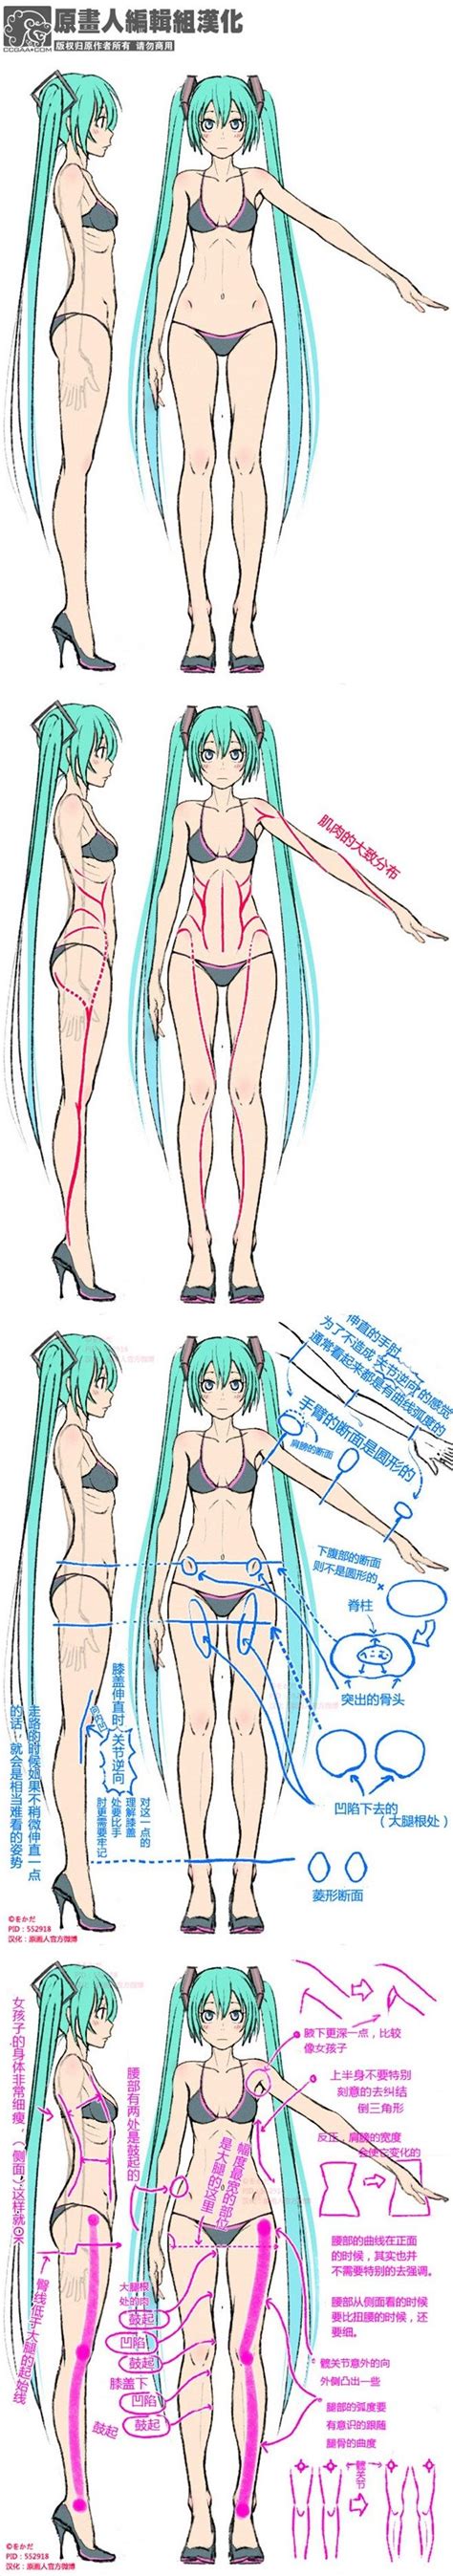 Ontologic modeling of the biceps brachii anime muscle drawings interior. 410 best images about Reference Model Sheets on Pinterest | Models, Cartoon and Make new friends